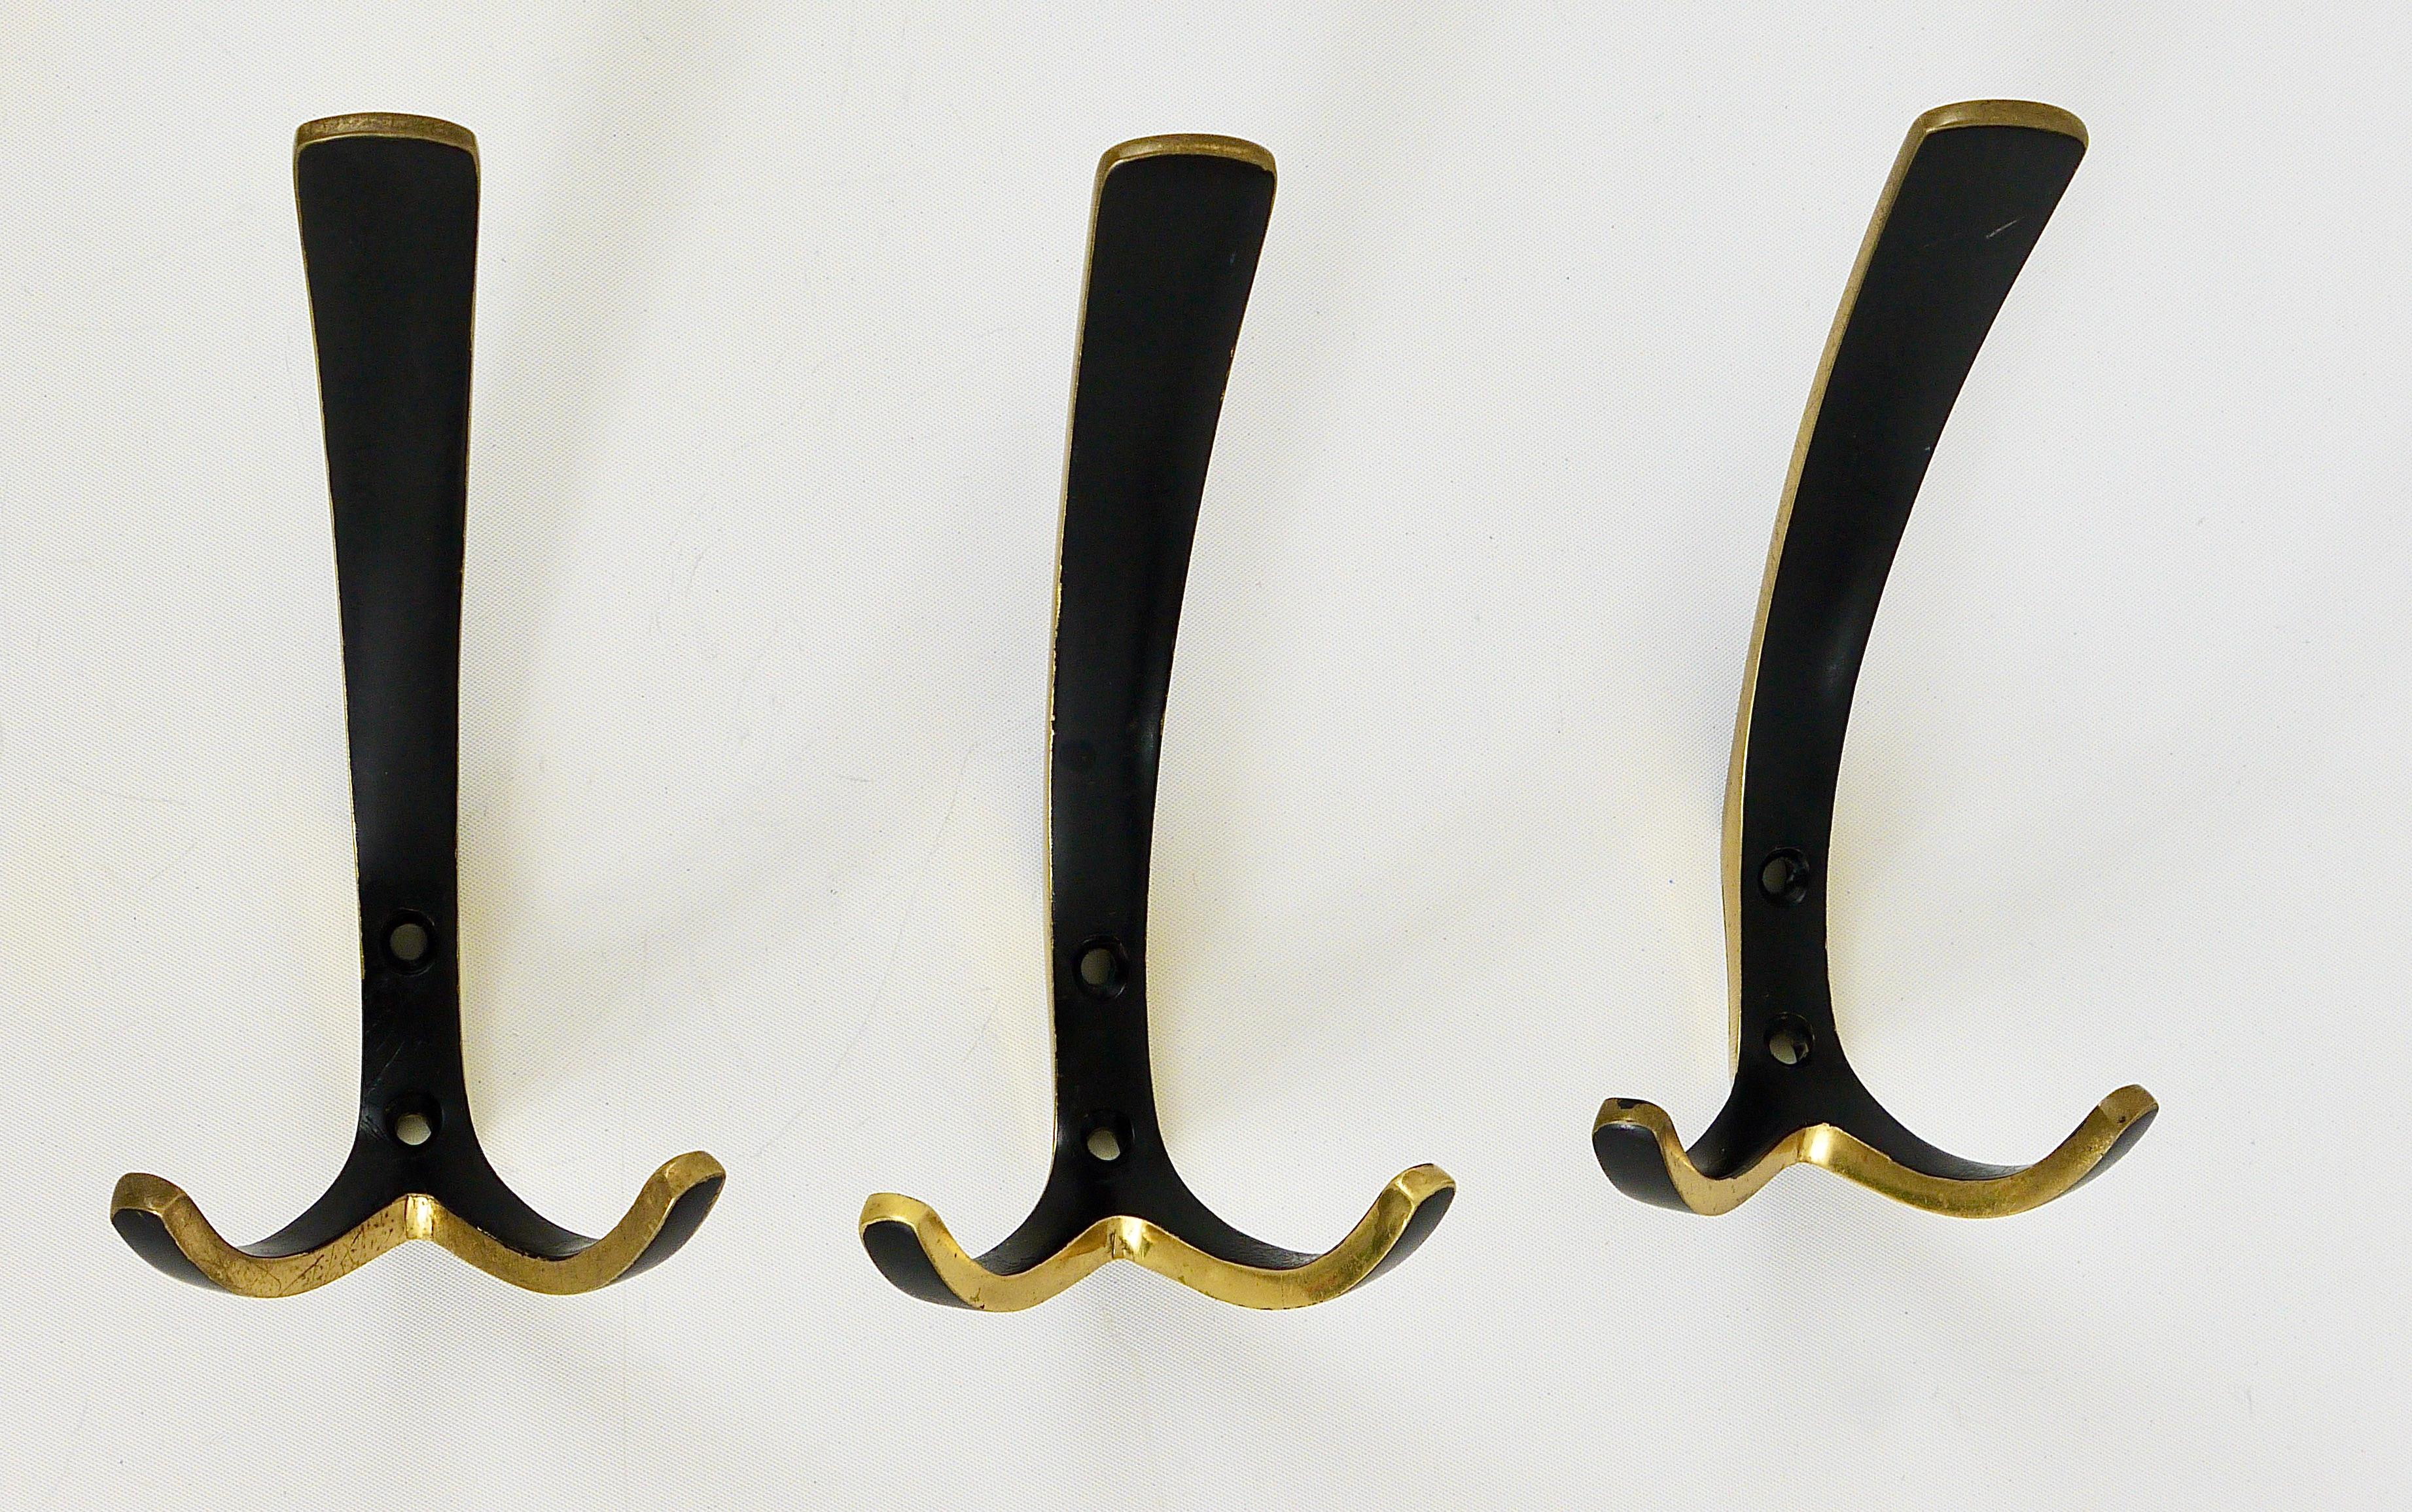 Up to 10 Midcentury Brass Double Wall Hooks by Herta Baller, Austria, 1950s For Sale 3